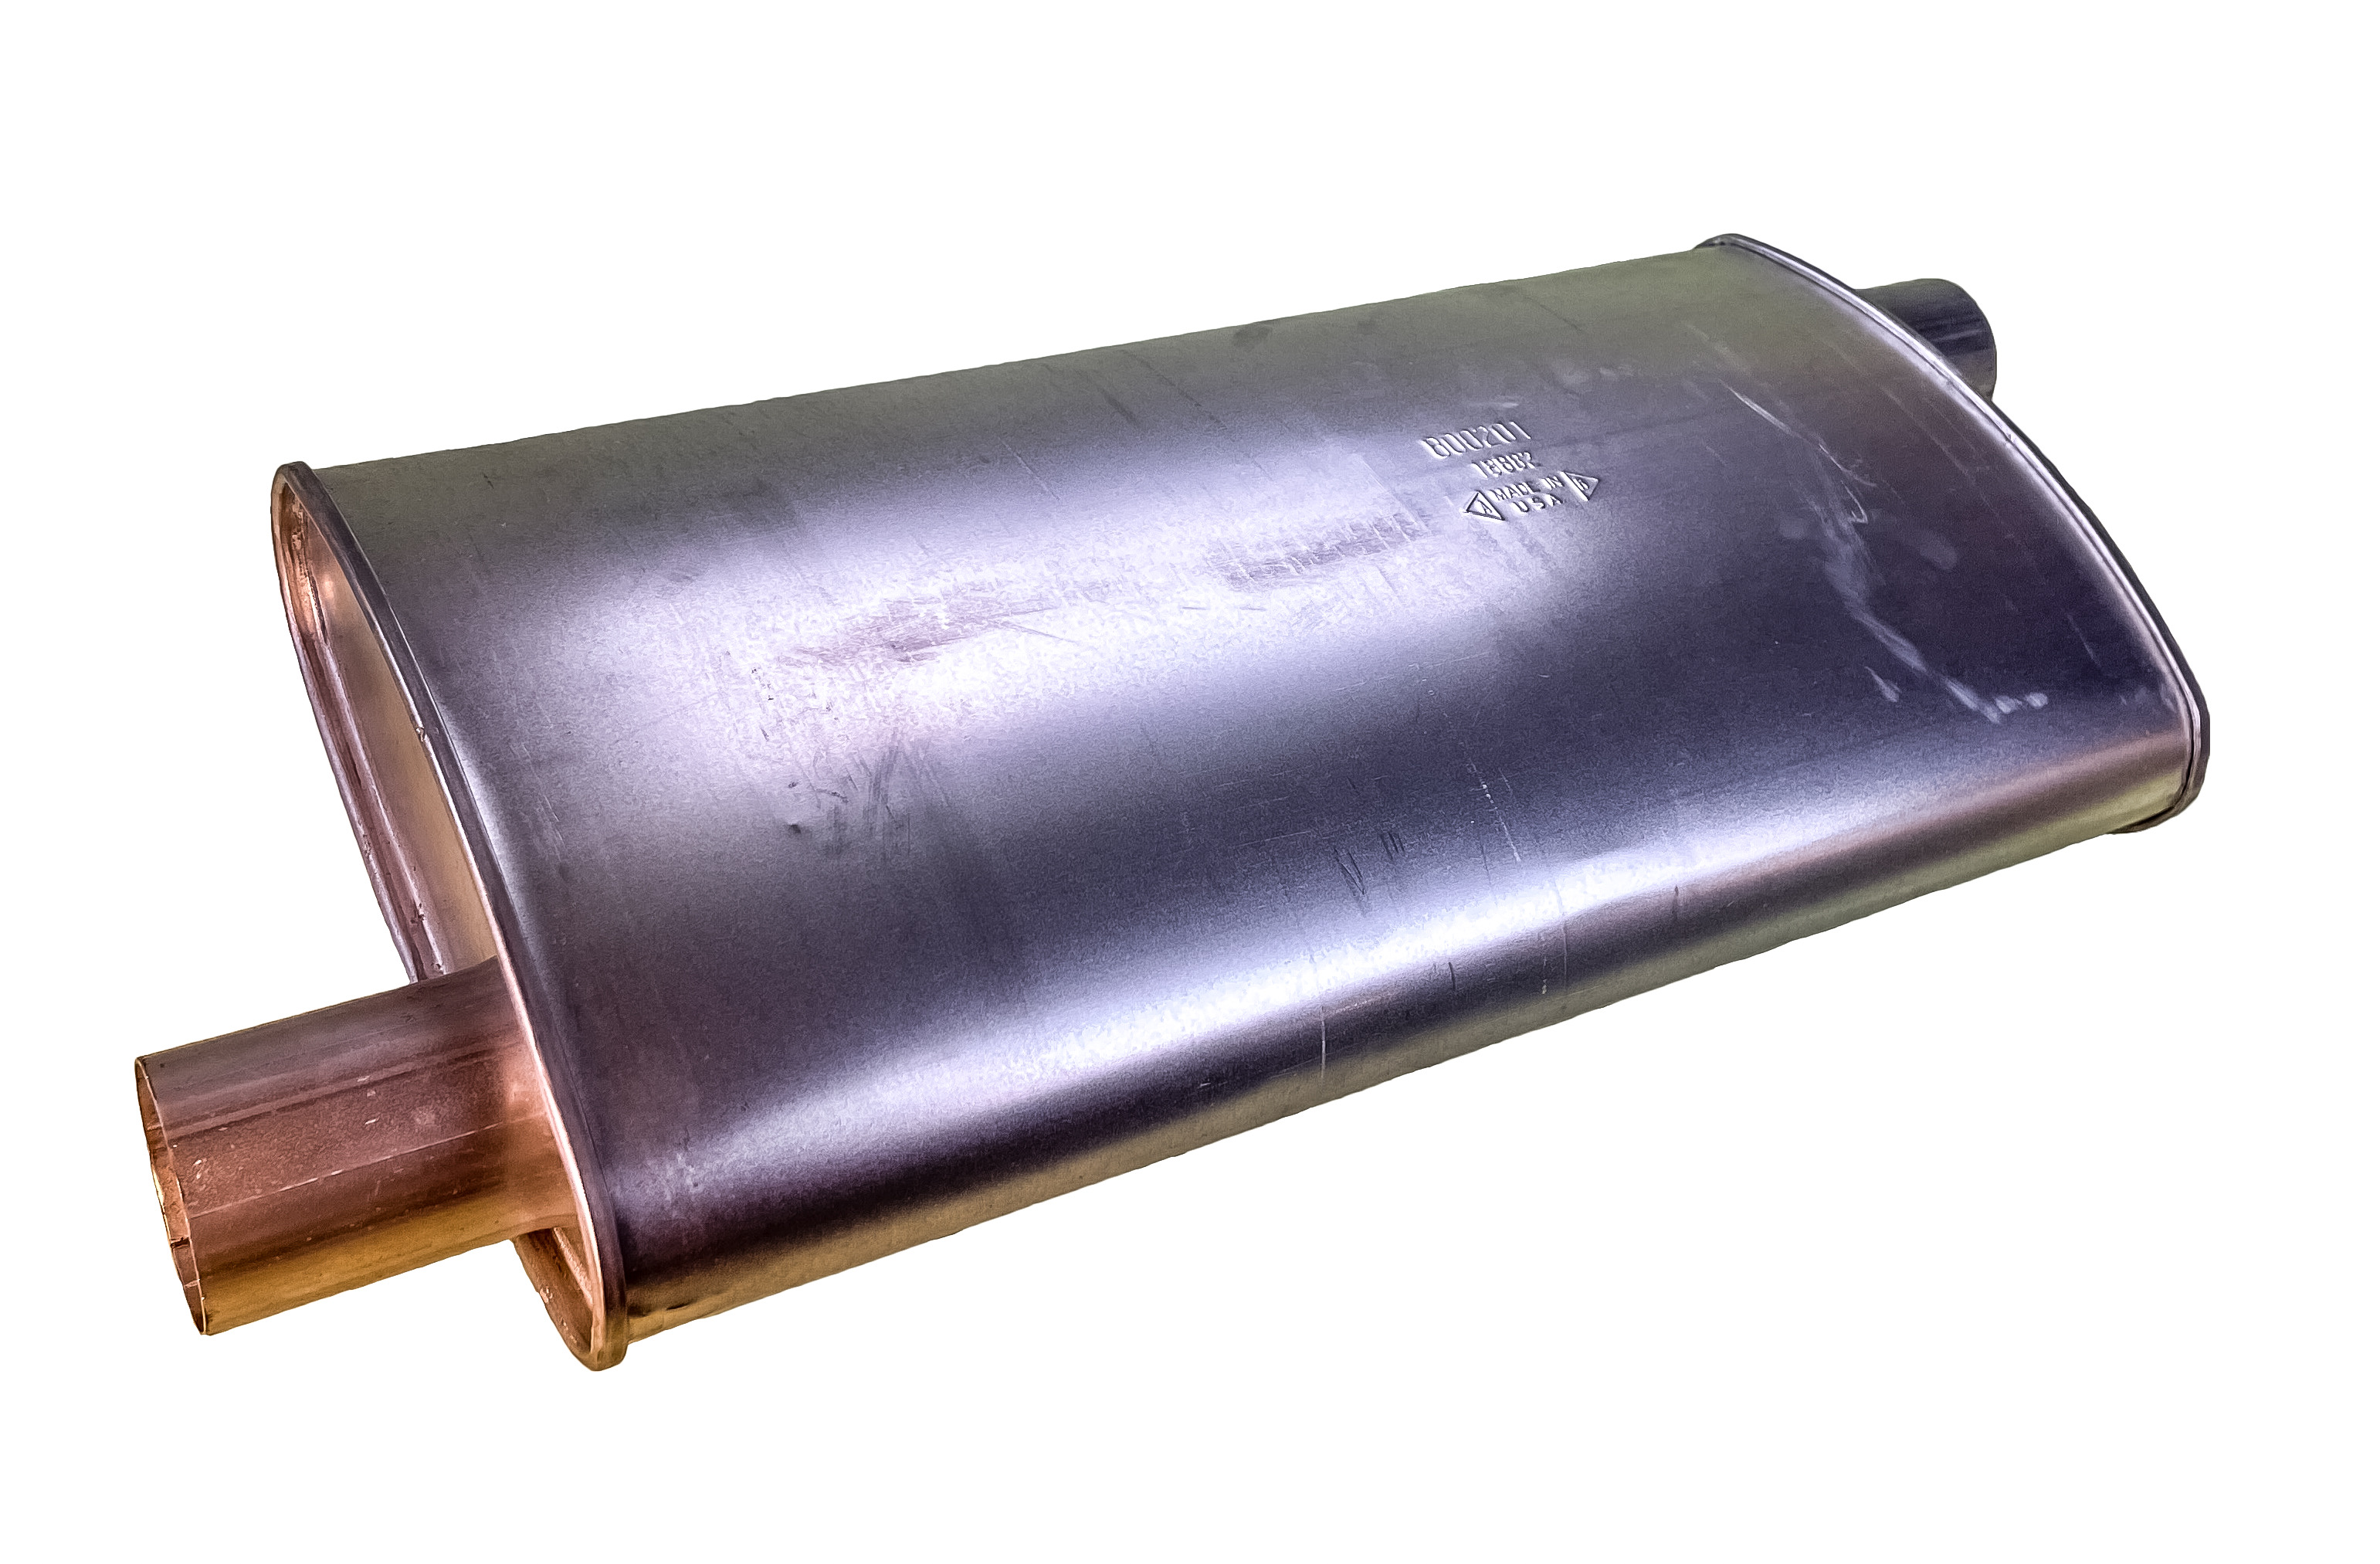 IMCO UNIVERSAL EXHAUST MUFFLER SINGLE OFFSET INLET / SINGLE OFFSET OUTLET / REVERSIBLE